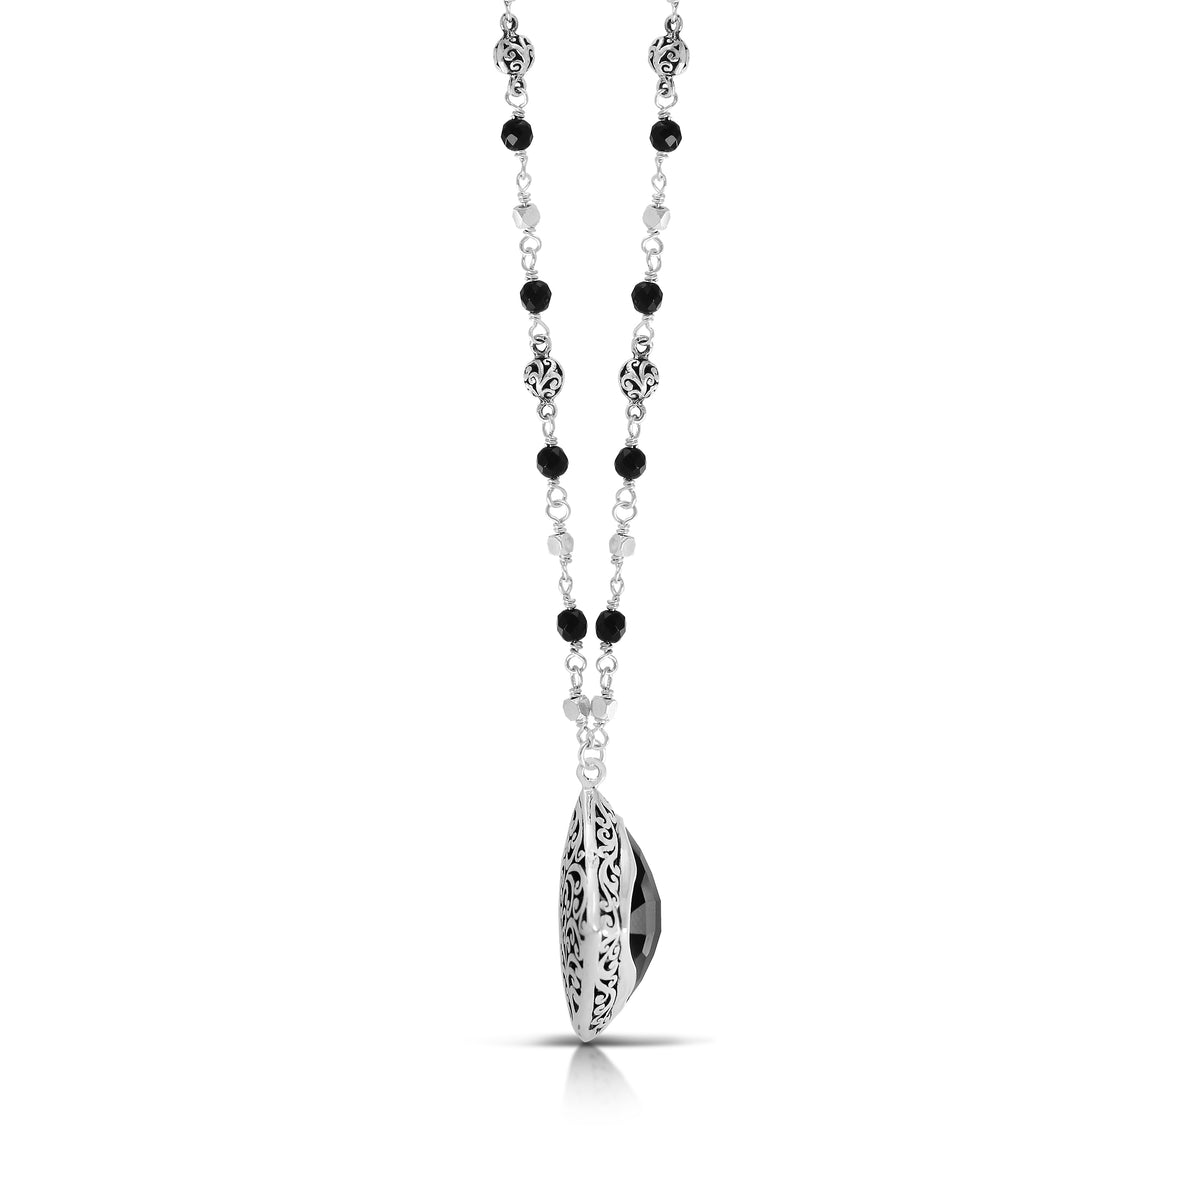 Black Onyx and LH Scroll Beads with 24mmx24mm Cushion Pendant Necklace (17'' - 20")